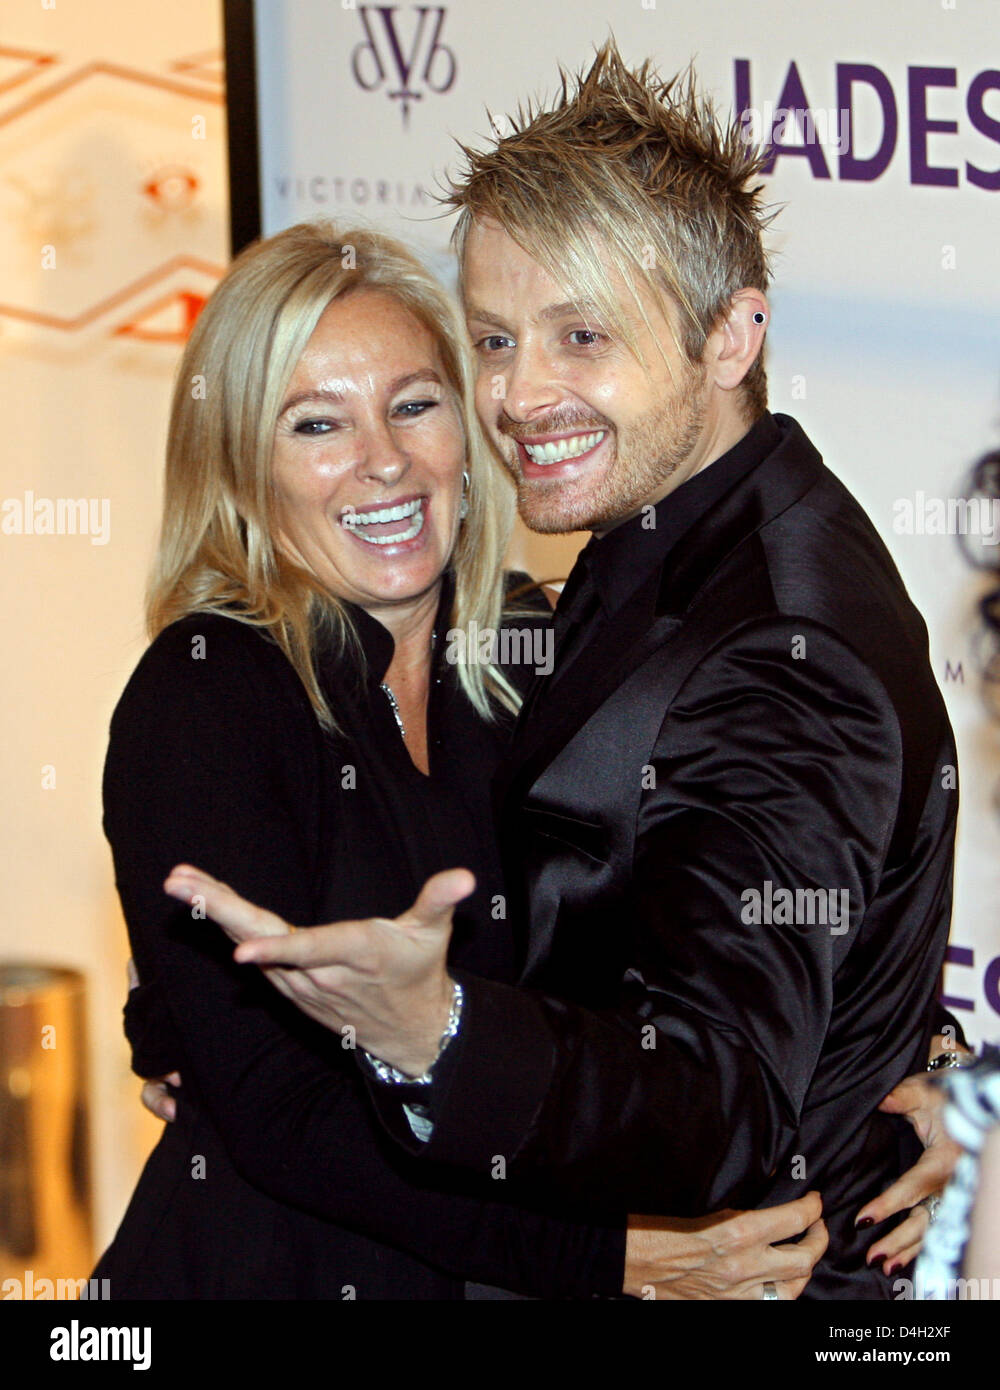 Store manager Evelyn Hammerstroem (L) and entertainer Ross Anthony pose during the presentation of Ex-Spice Girl Victoria Beckham's jeans collection 'dVb' at a fashion store in Duesseldorf, Germany, 15 October 2008. Beckham introduced special guests and celebrities to the highlights of her collection. Photo: Franz-Peter Tschauner Stock Photo